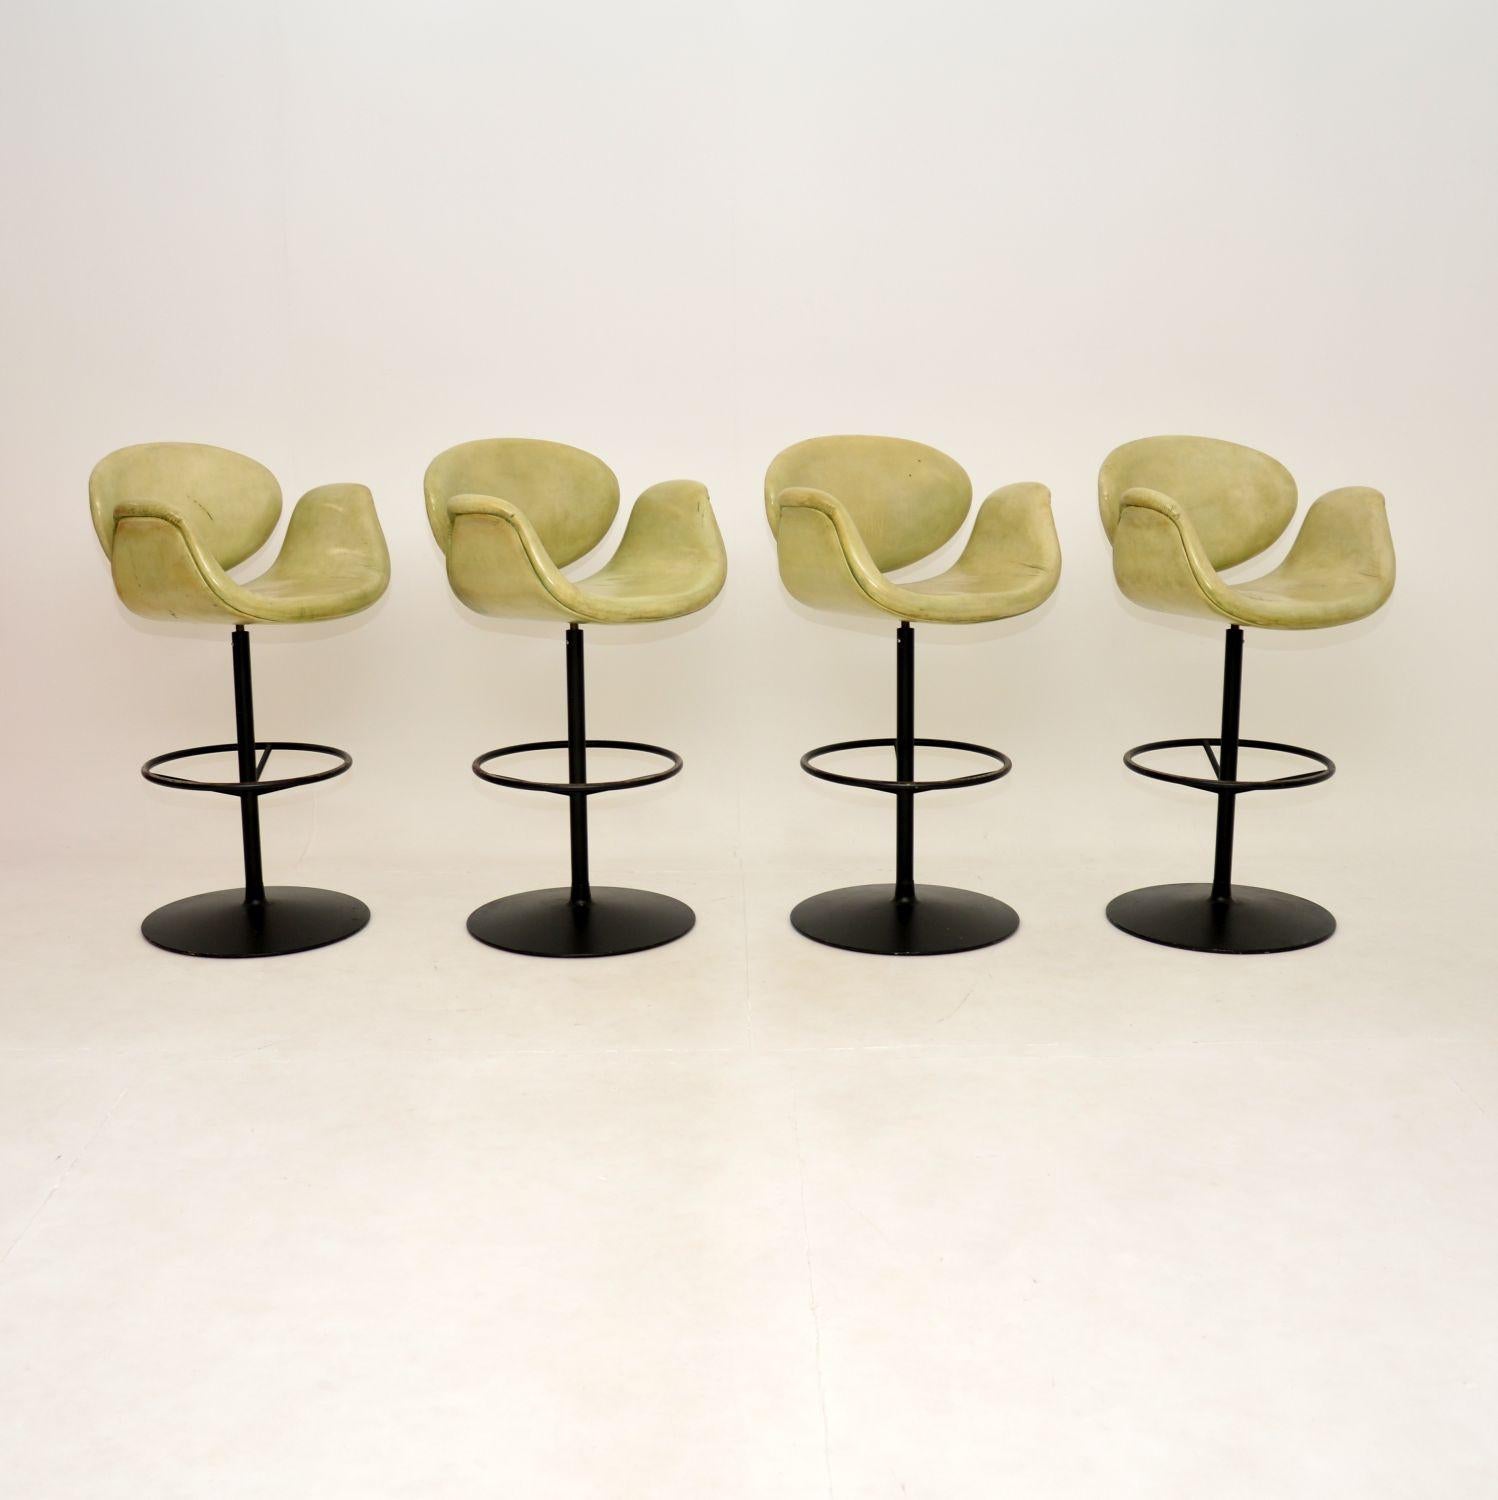 A magnificent set of four vintage leather tulip bar stools by Pierre Paulin. They were originally designed in 1965, this set were made in the Netherlands by Artifort, they date from around the 1970-80’s.

The quality is exceptional, they are